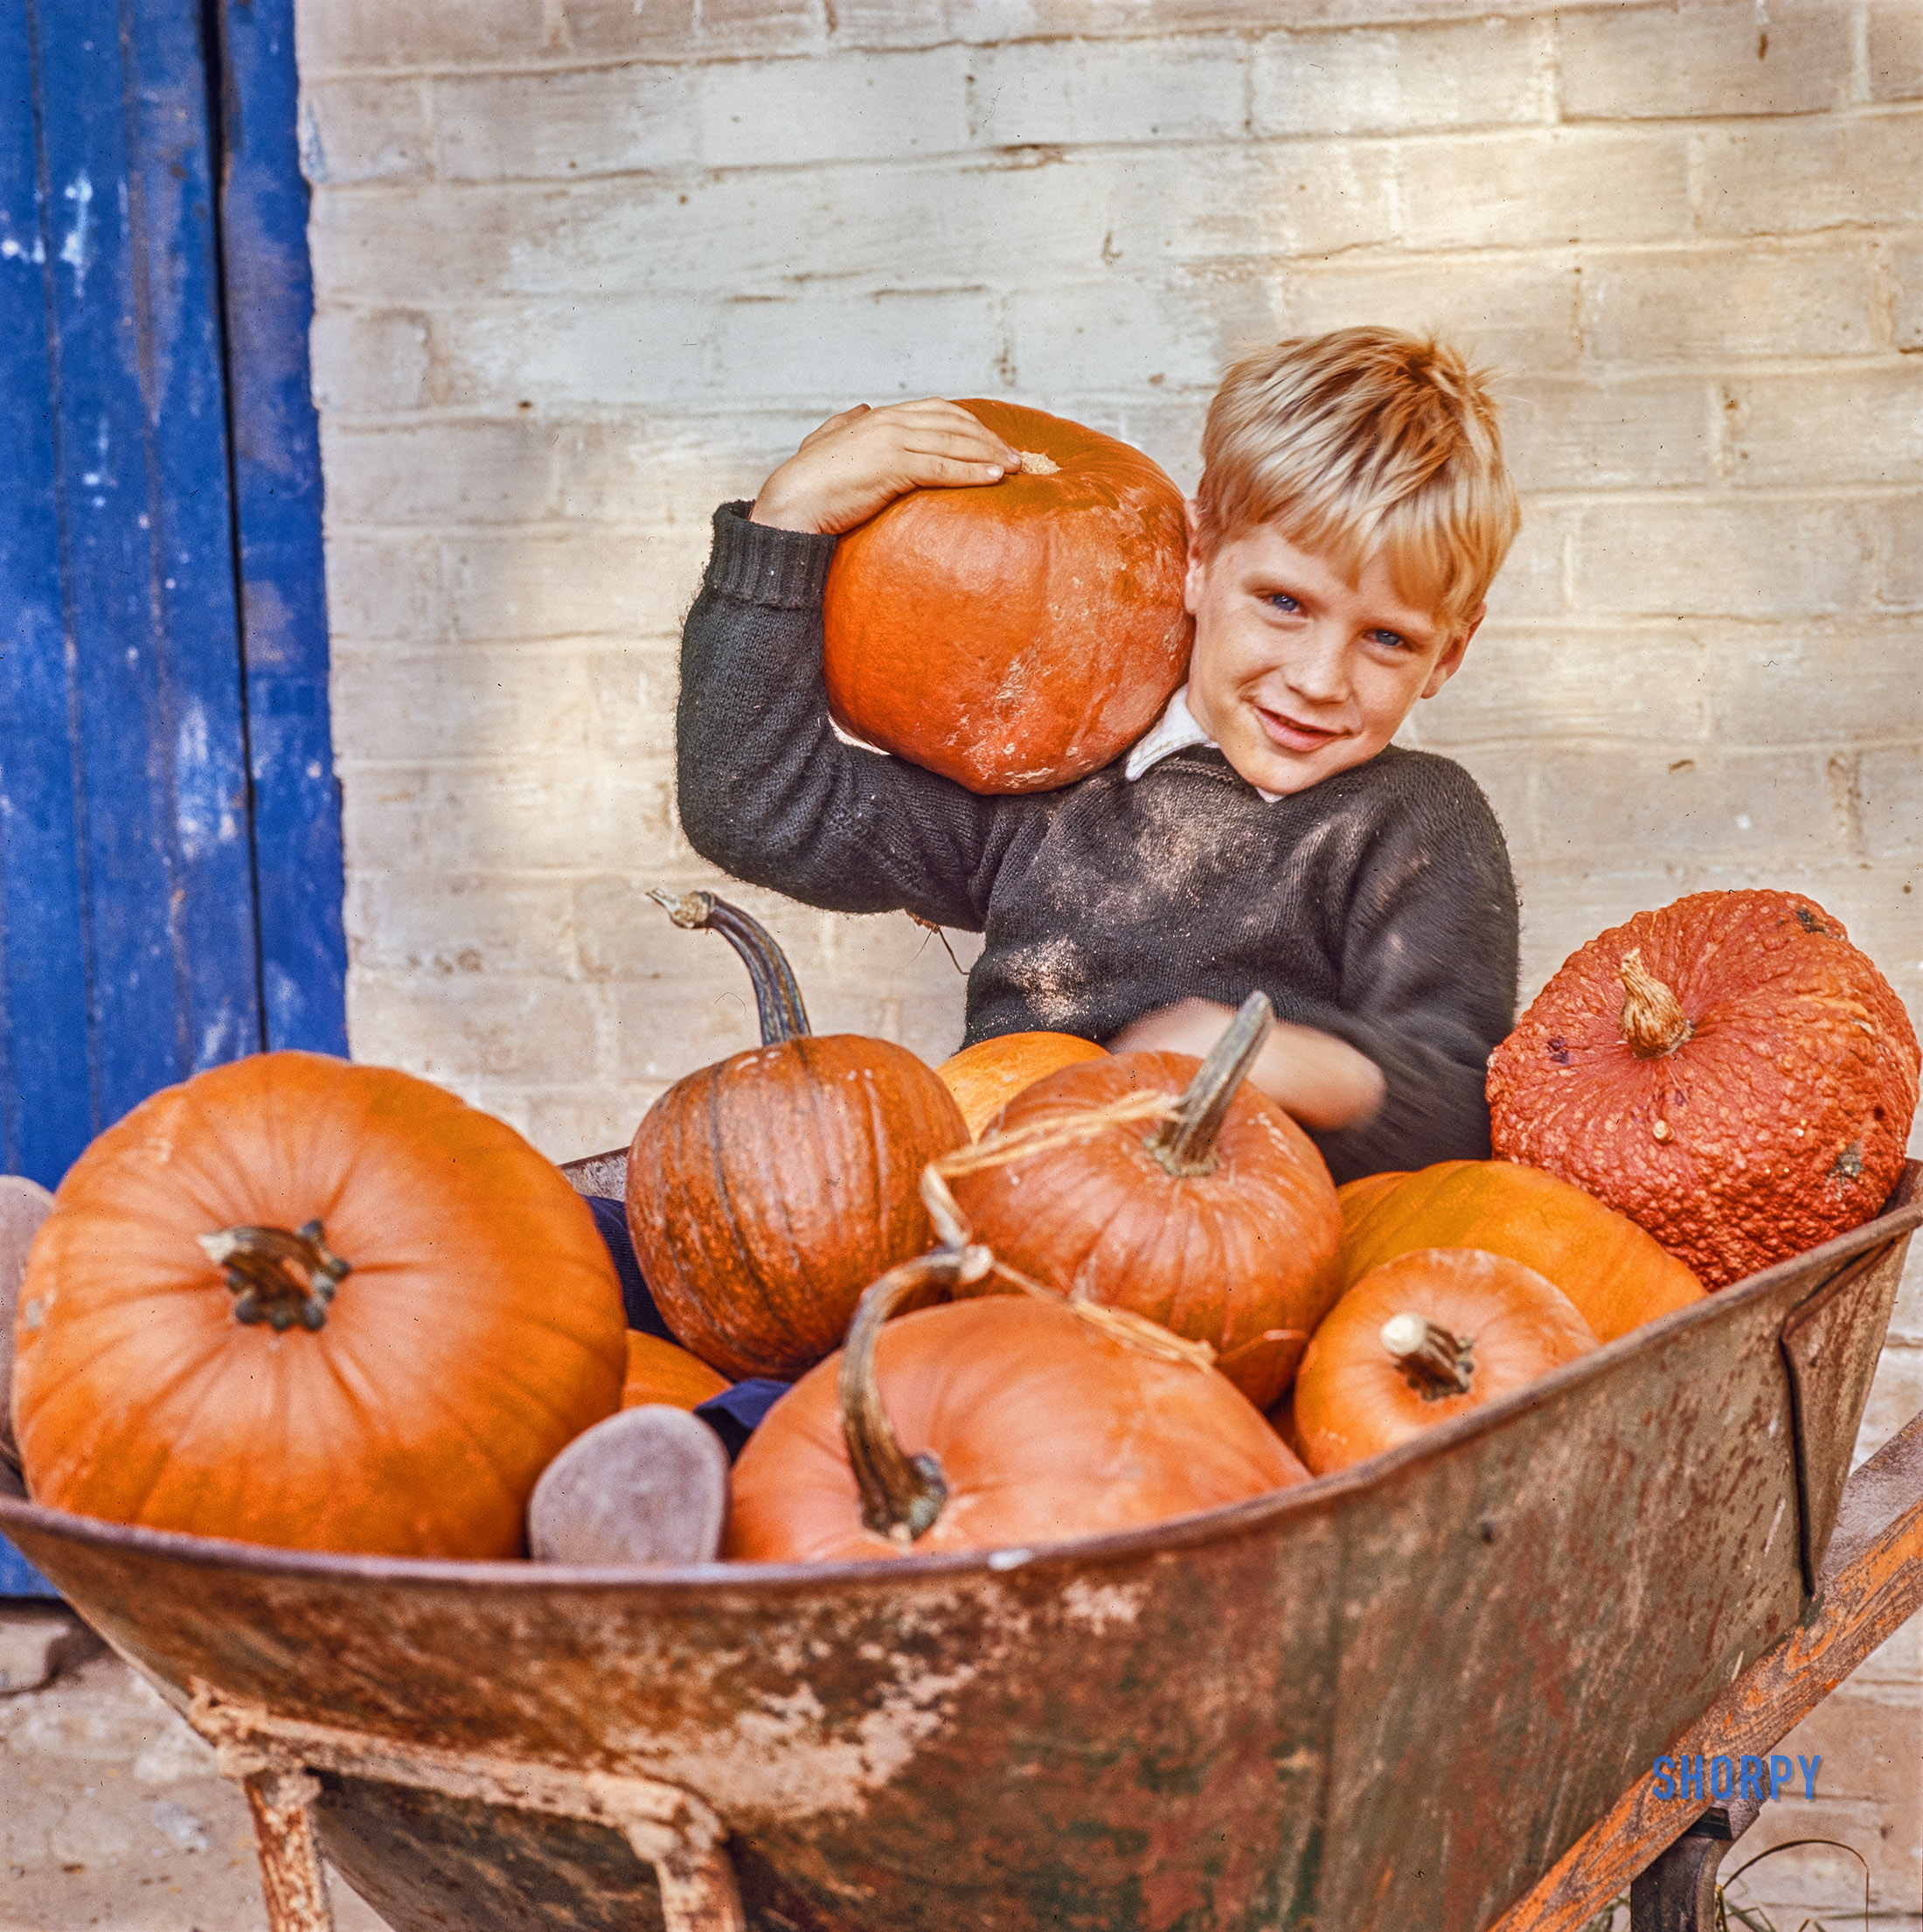 Fort Washington, Pennsylvania, 1963. "Shooting fashions and autumn scenes at Pheasant Run Farm, home of Mrs. Robert McLean." 120mm color transparency by Toni Frissell. View full size.